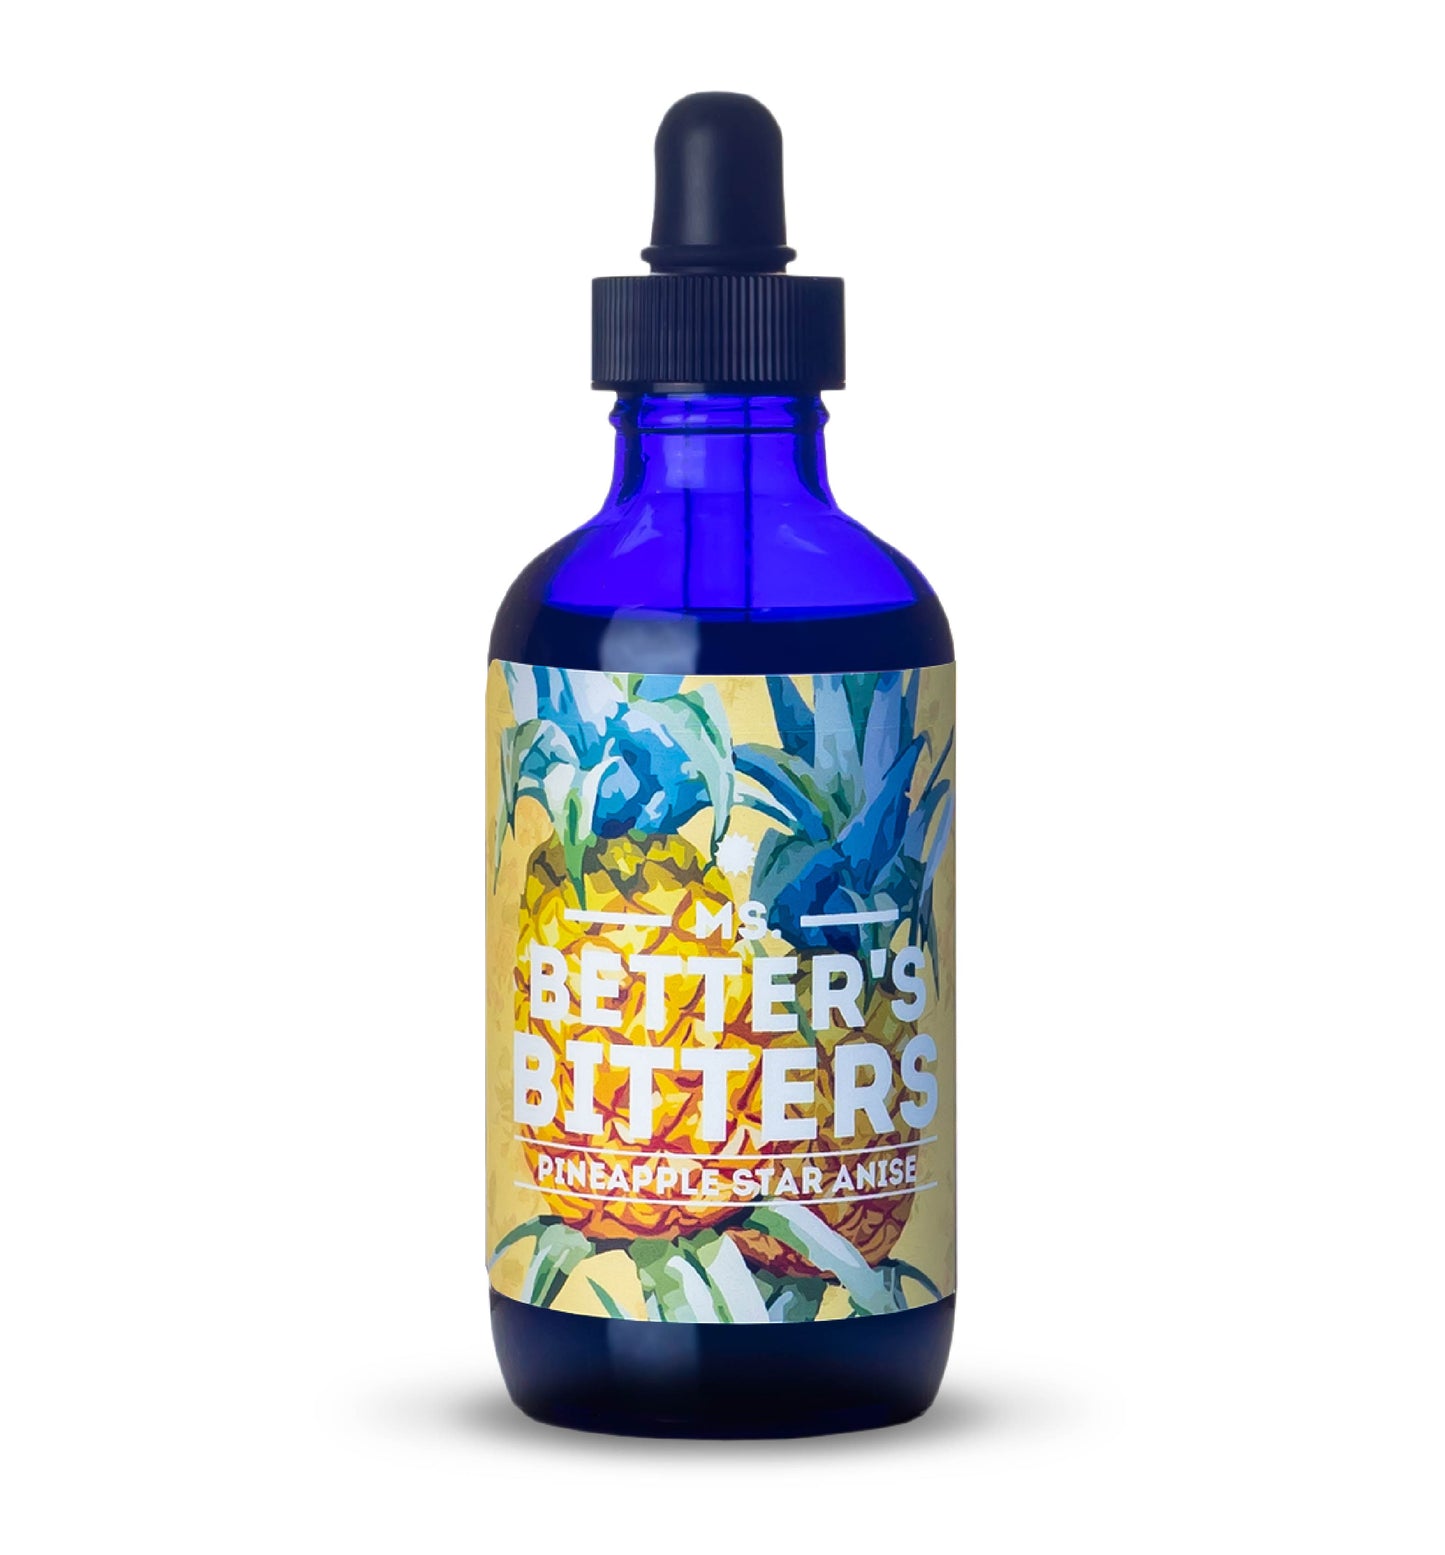 Pineapple Star Anise Bitters